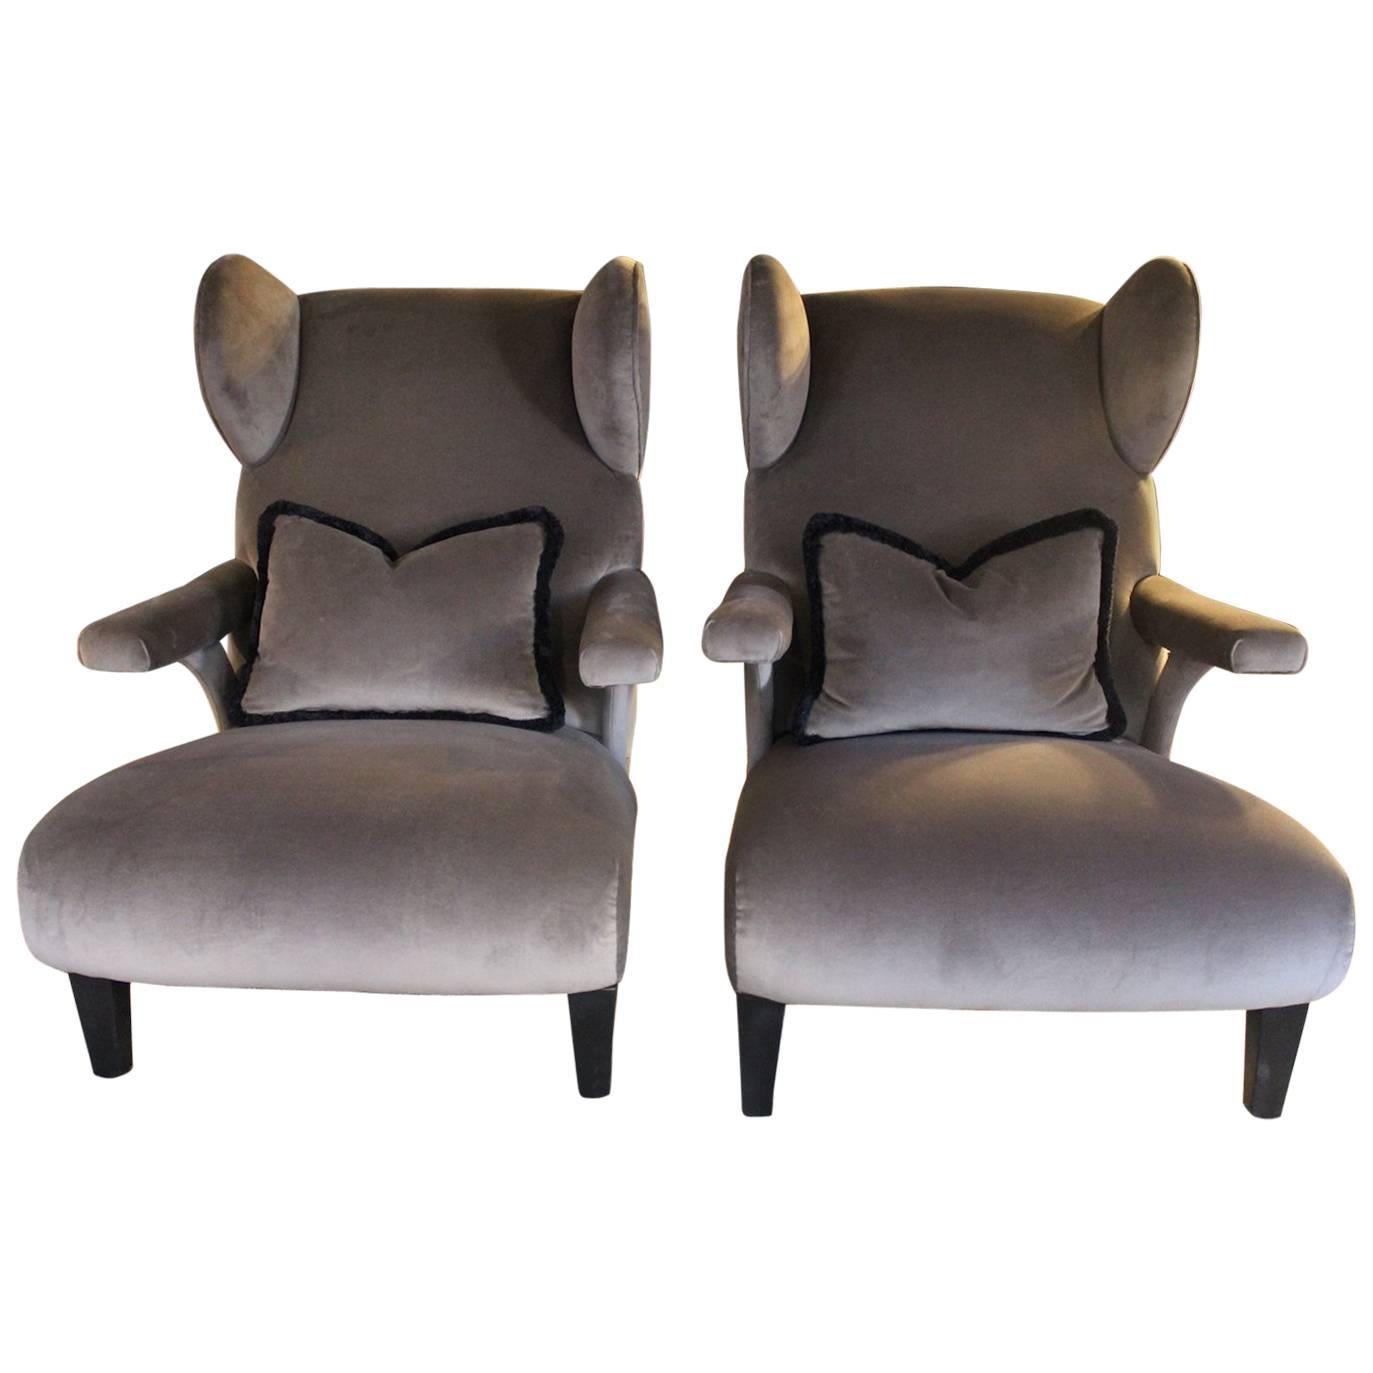 1940s "Bergere" Armchairs